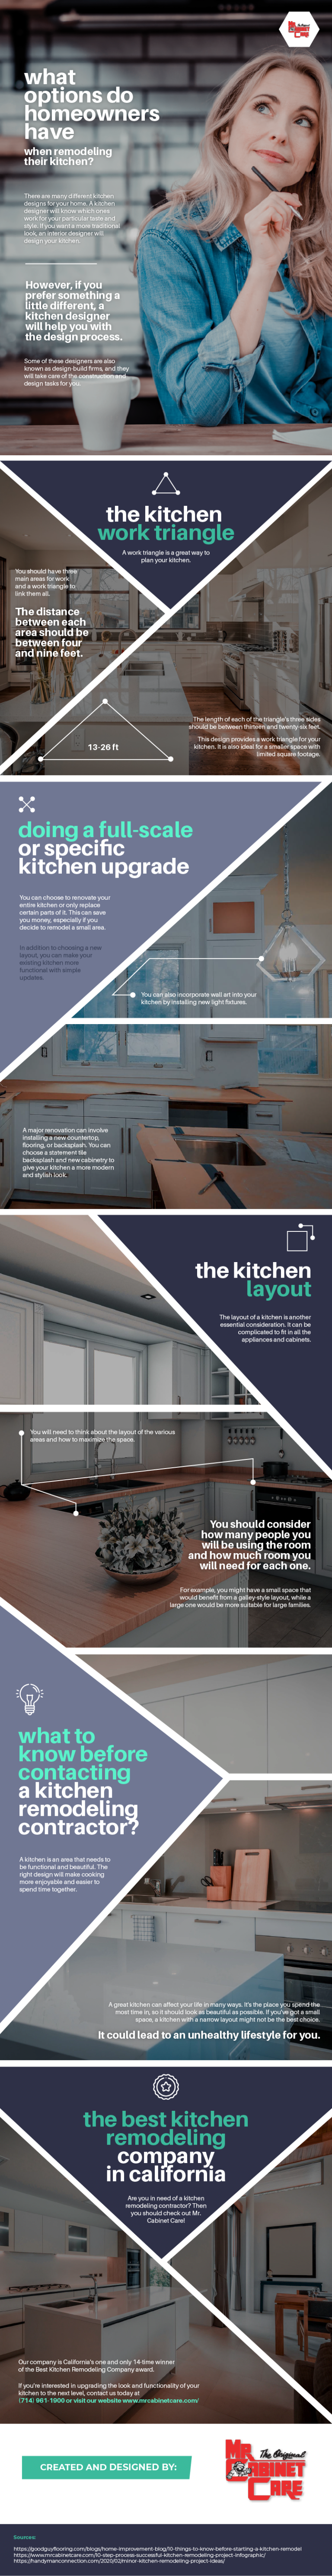 What_Options_Do_Homeowners_Have_When_Remodeling_Their_Kitchen_infographic_image_22
